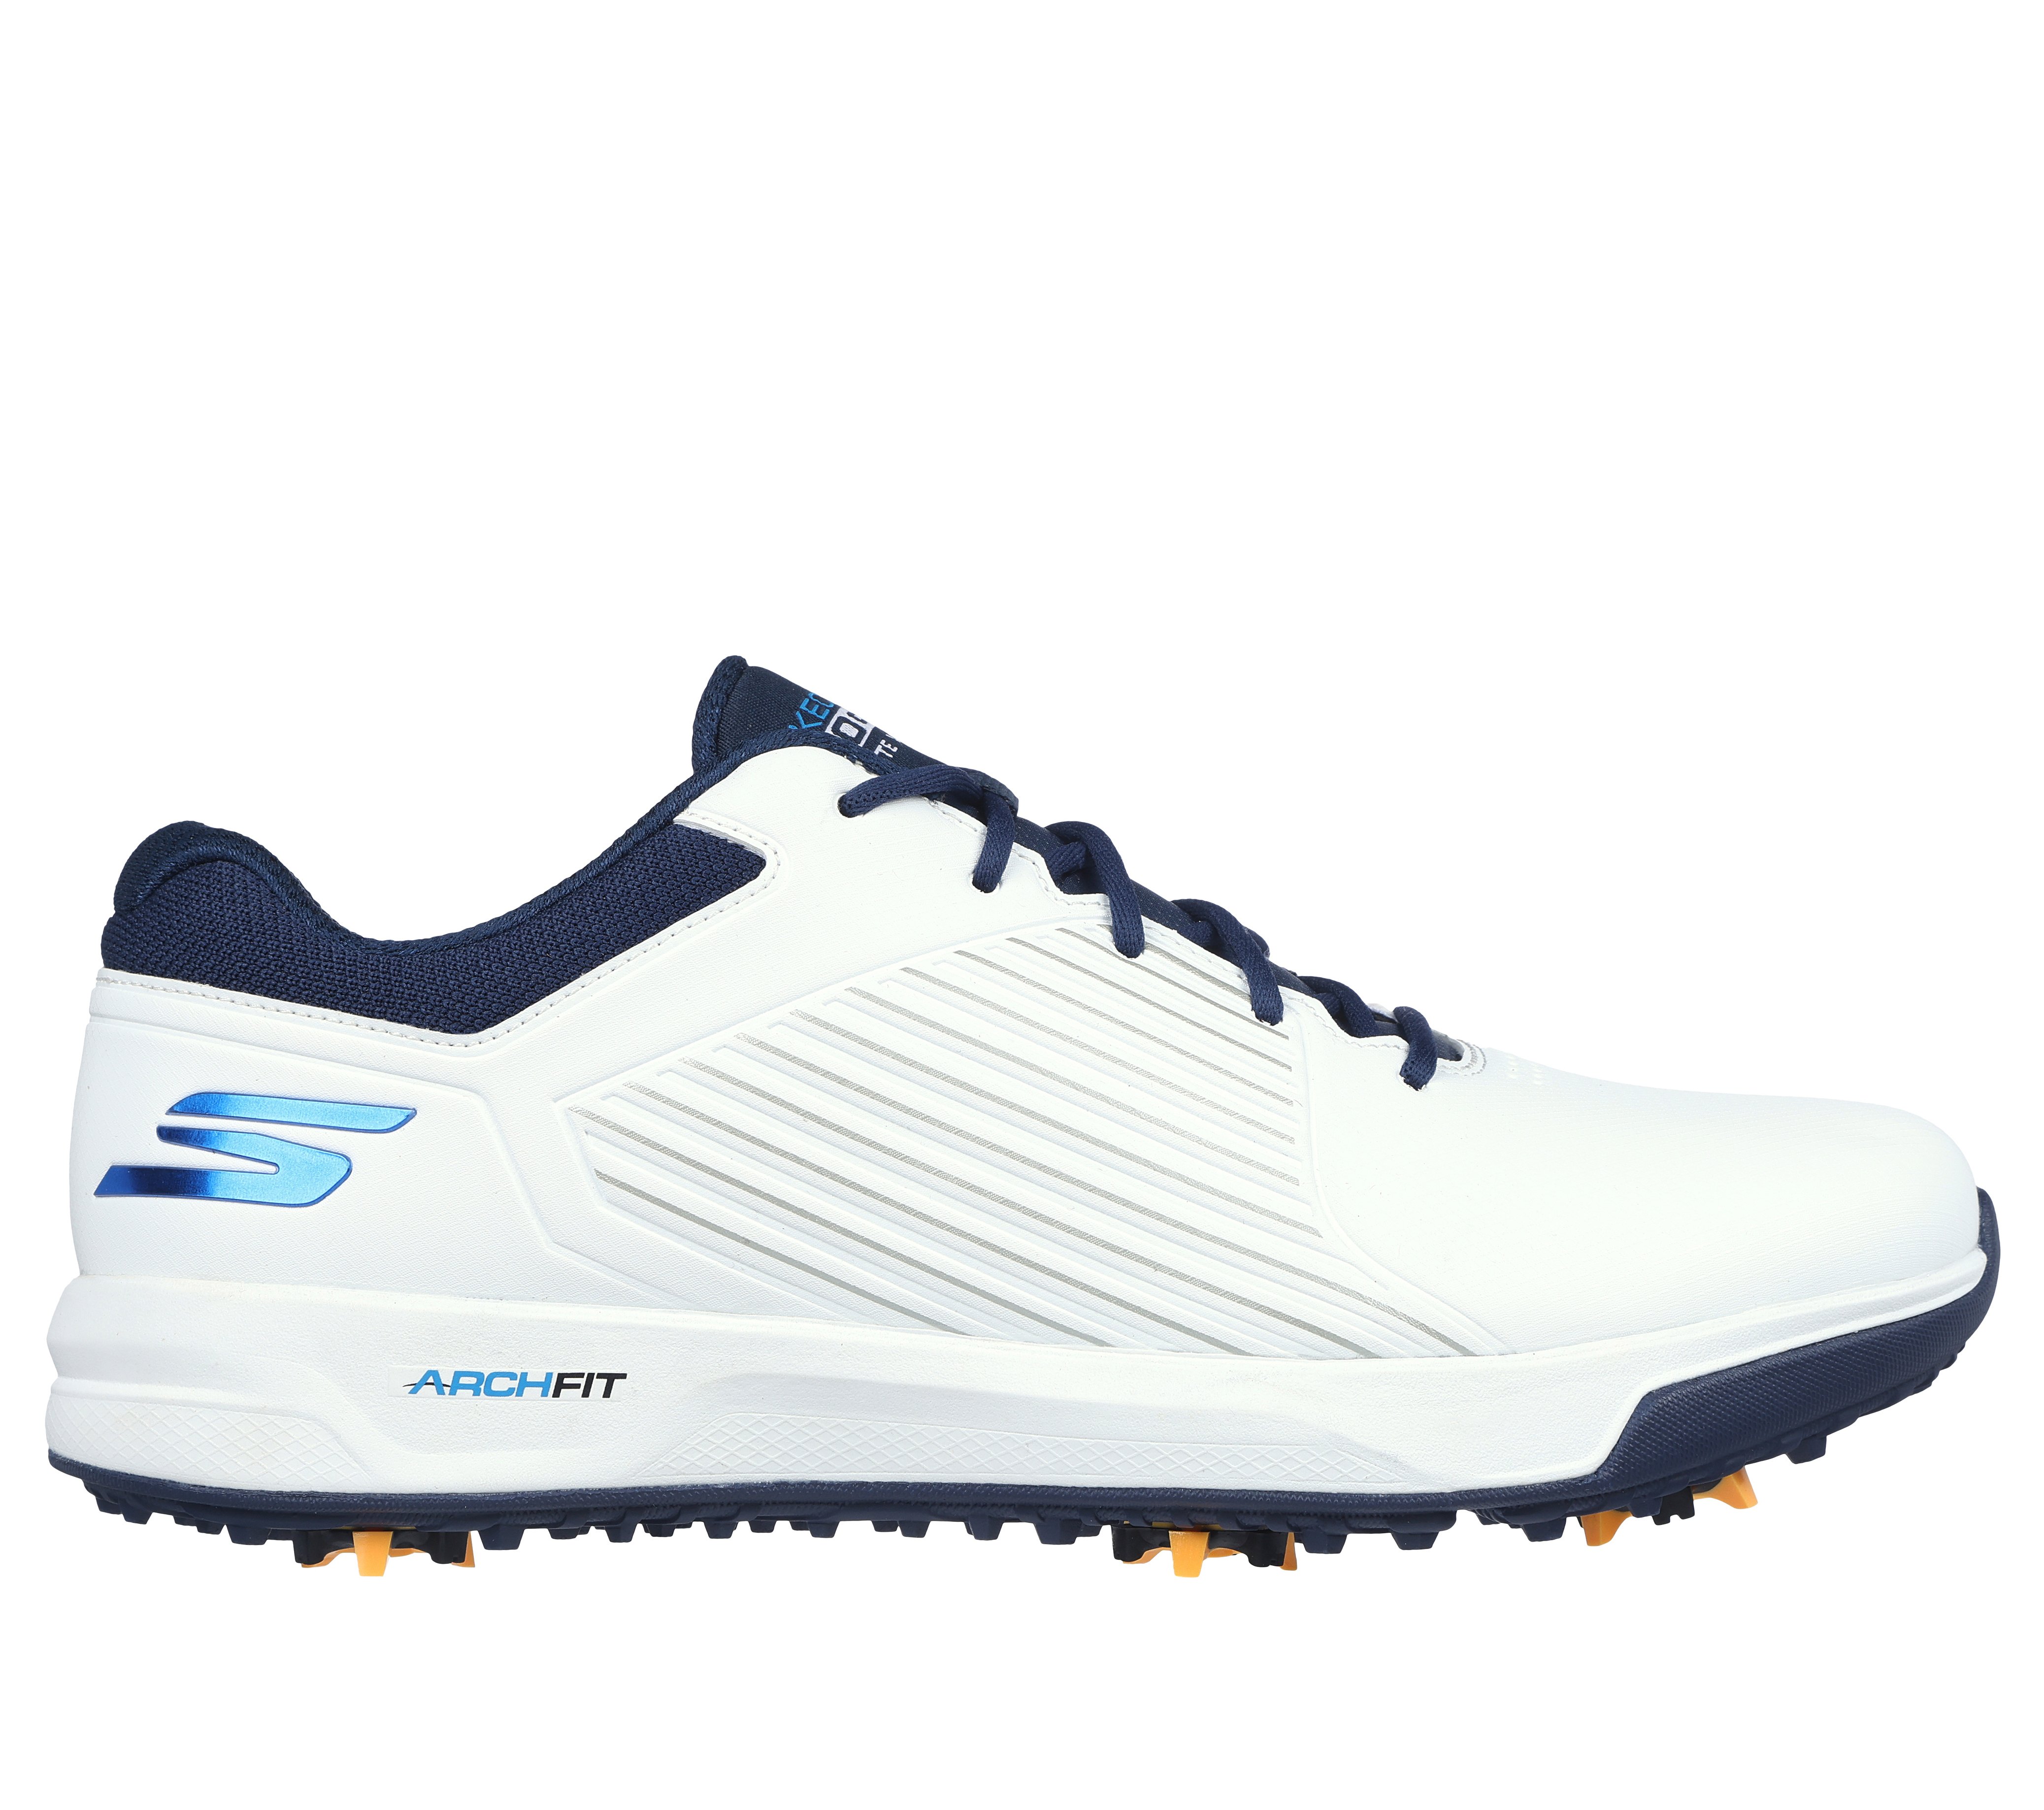 Skechers Golf Shoes Size Guide | tunersread.com